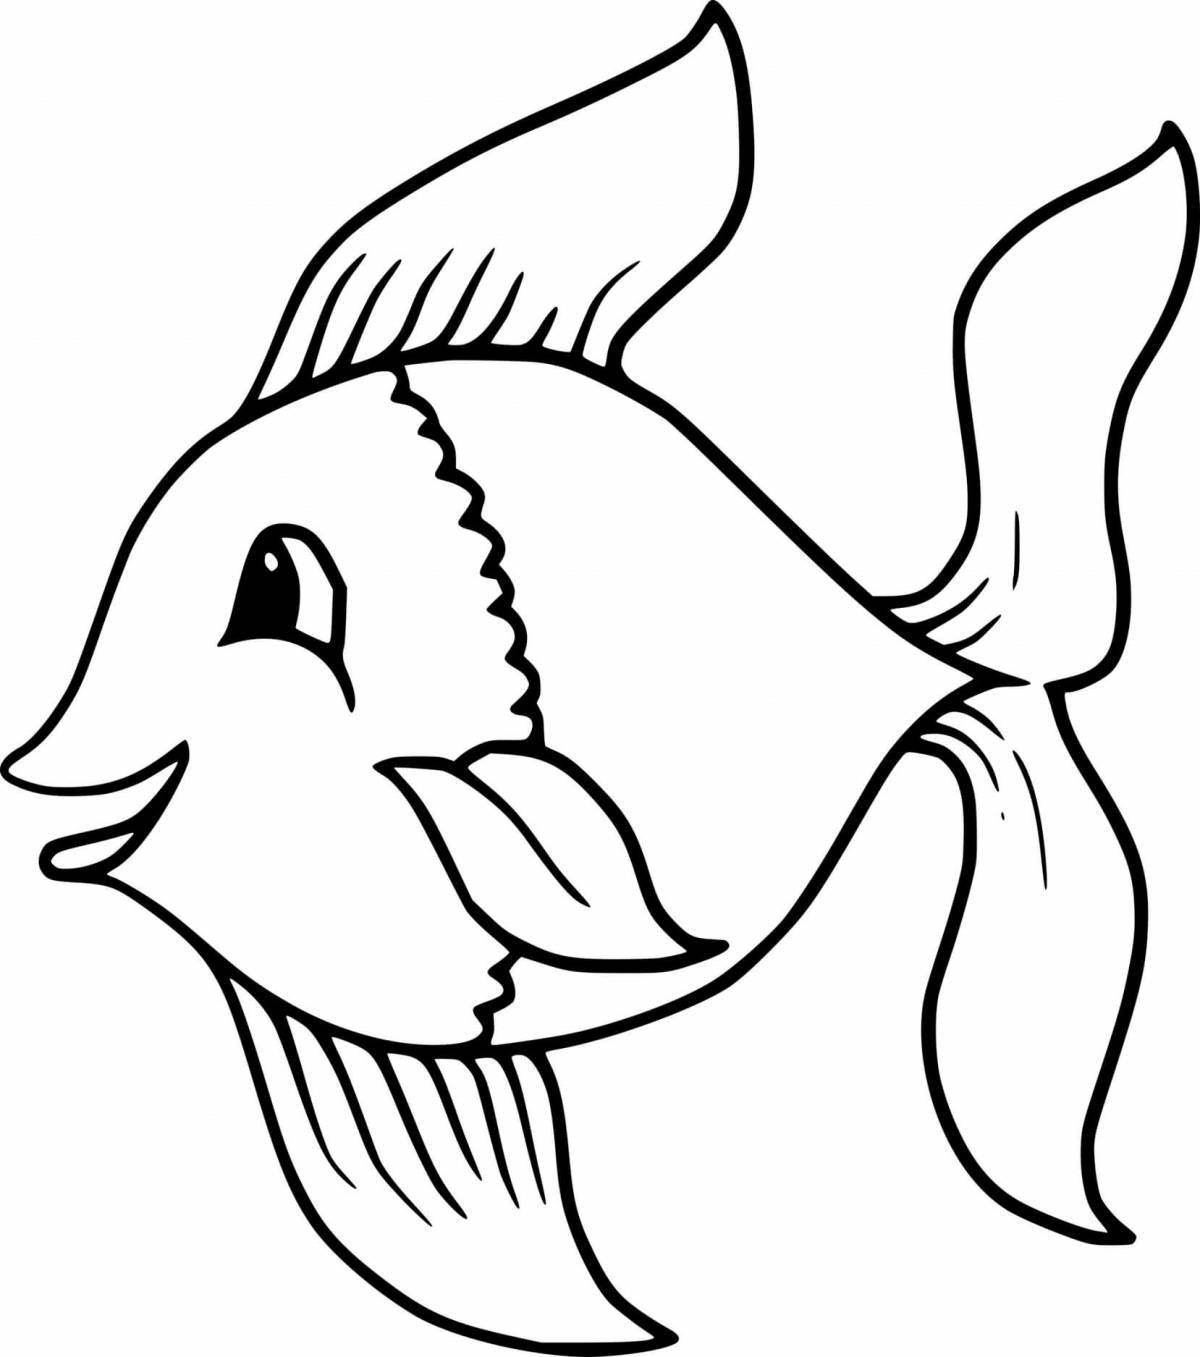 Coloring page dazzling parrotfish